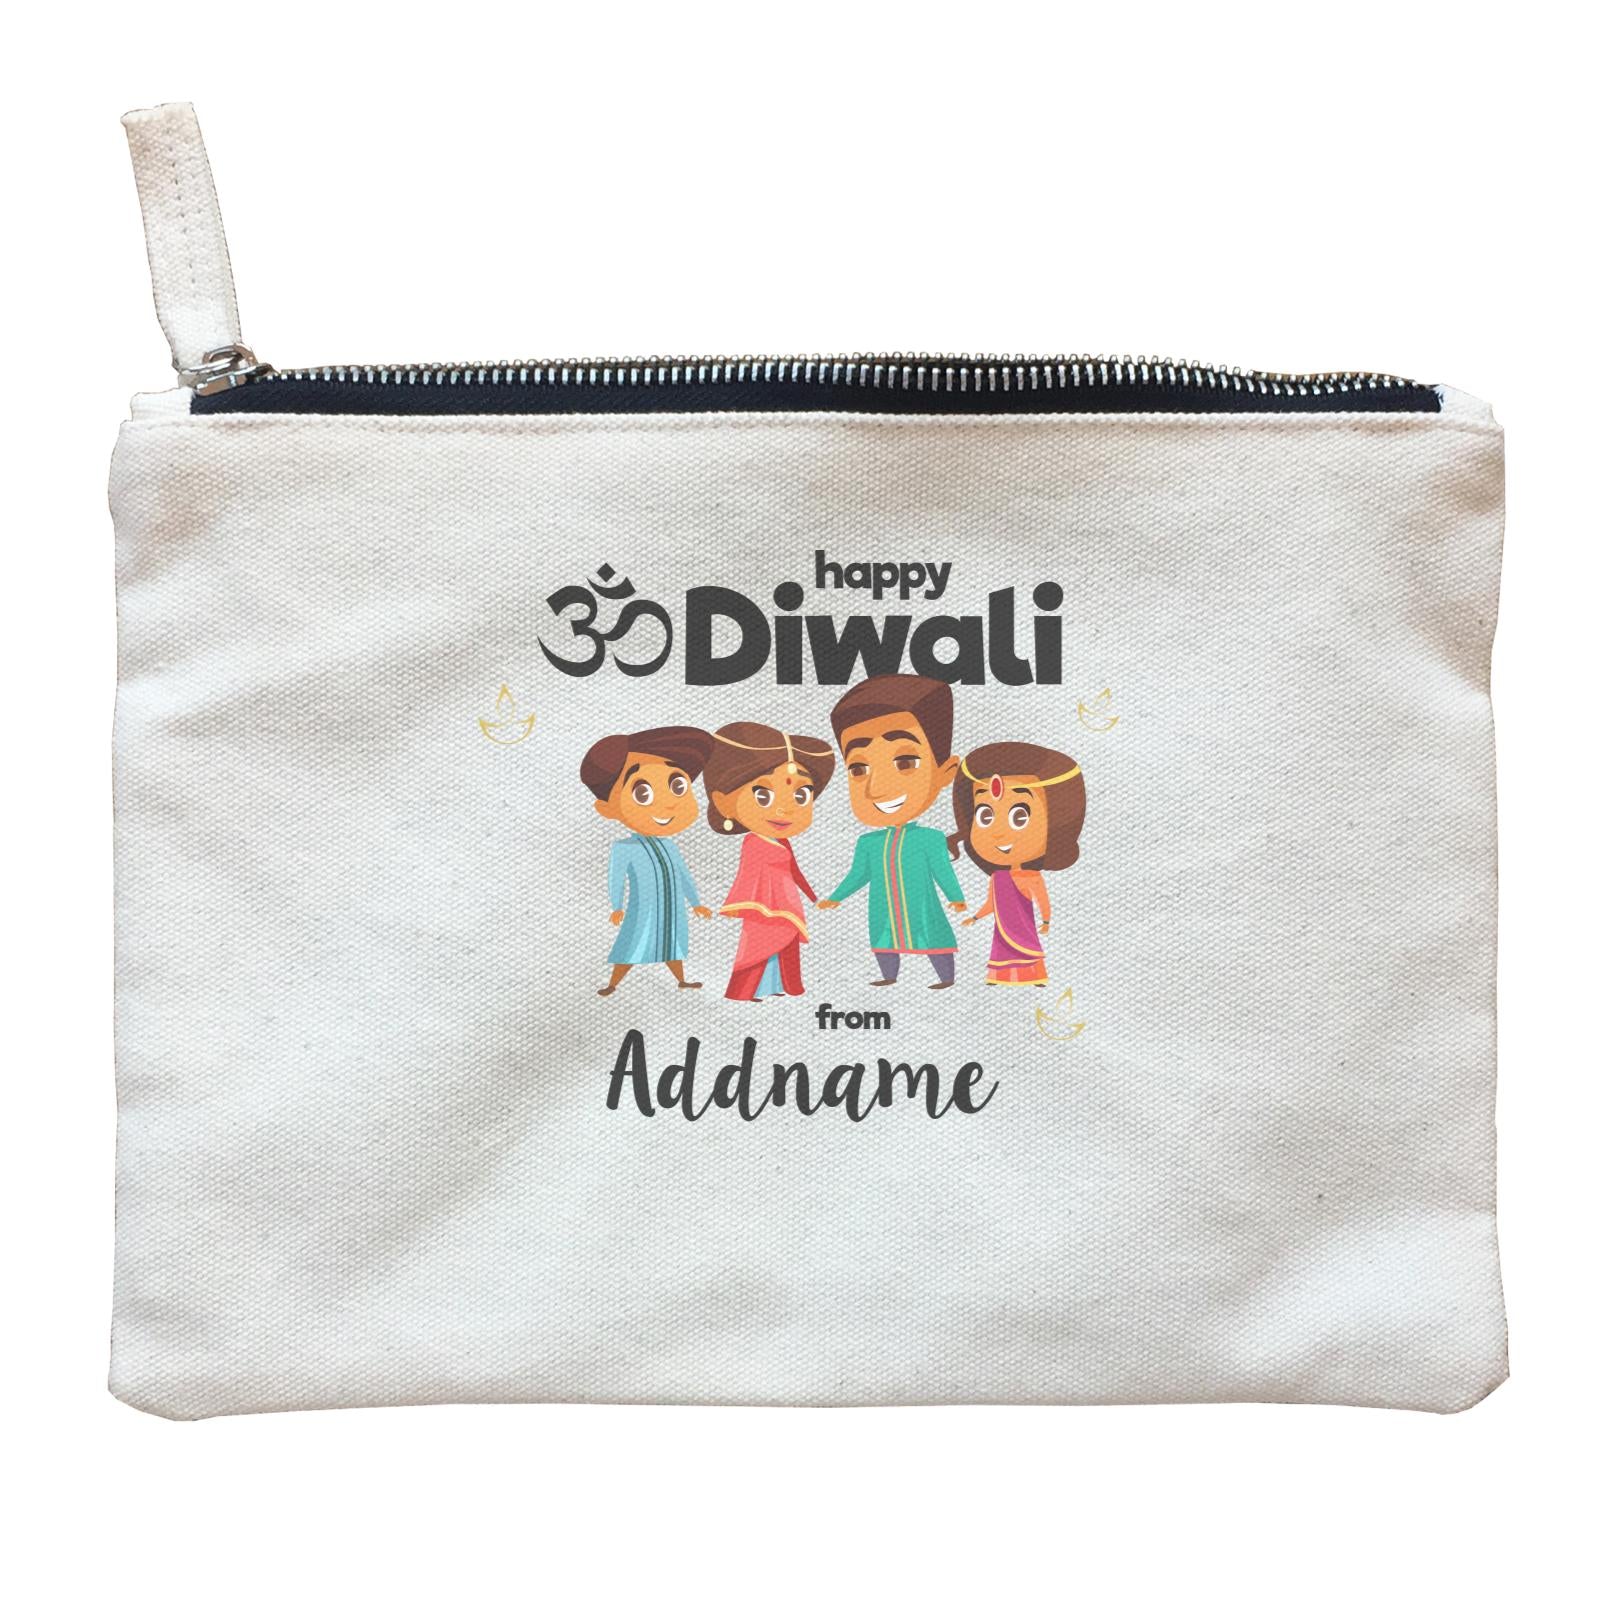 Cute Family Of Four OM Happy Diwali From Addname Zipper Pouch